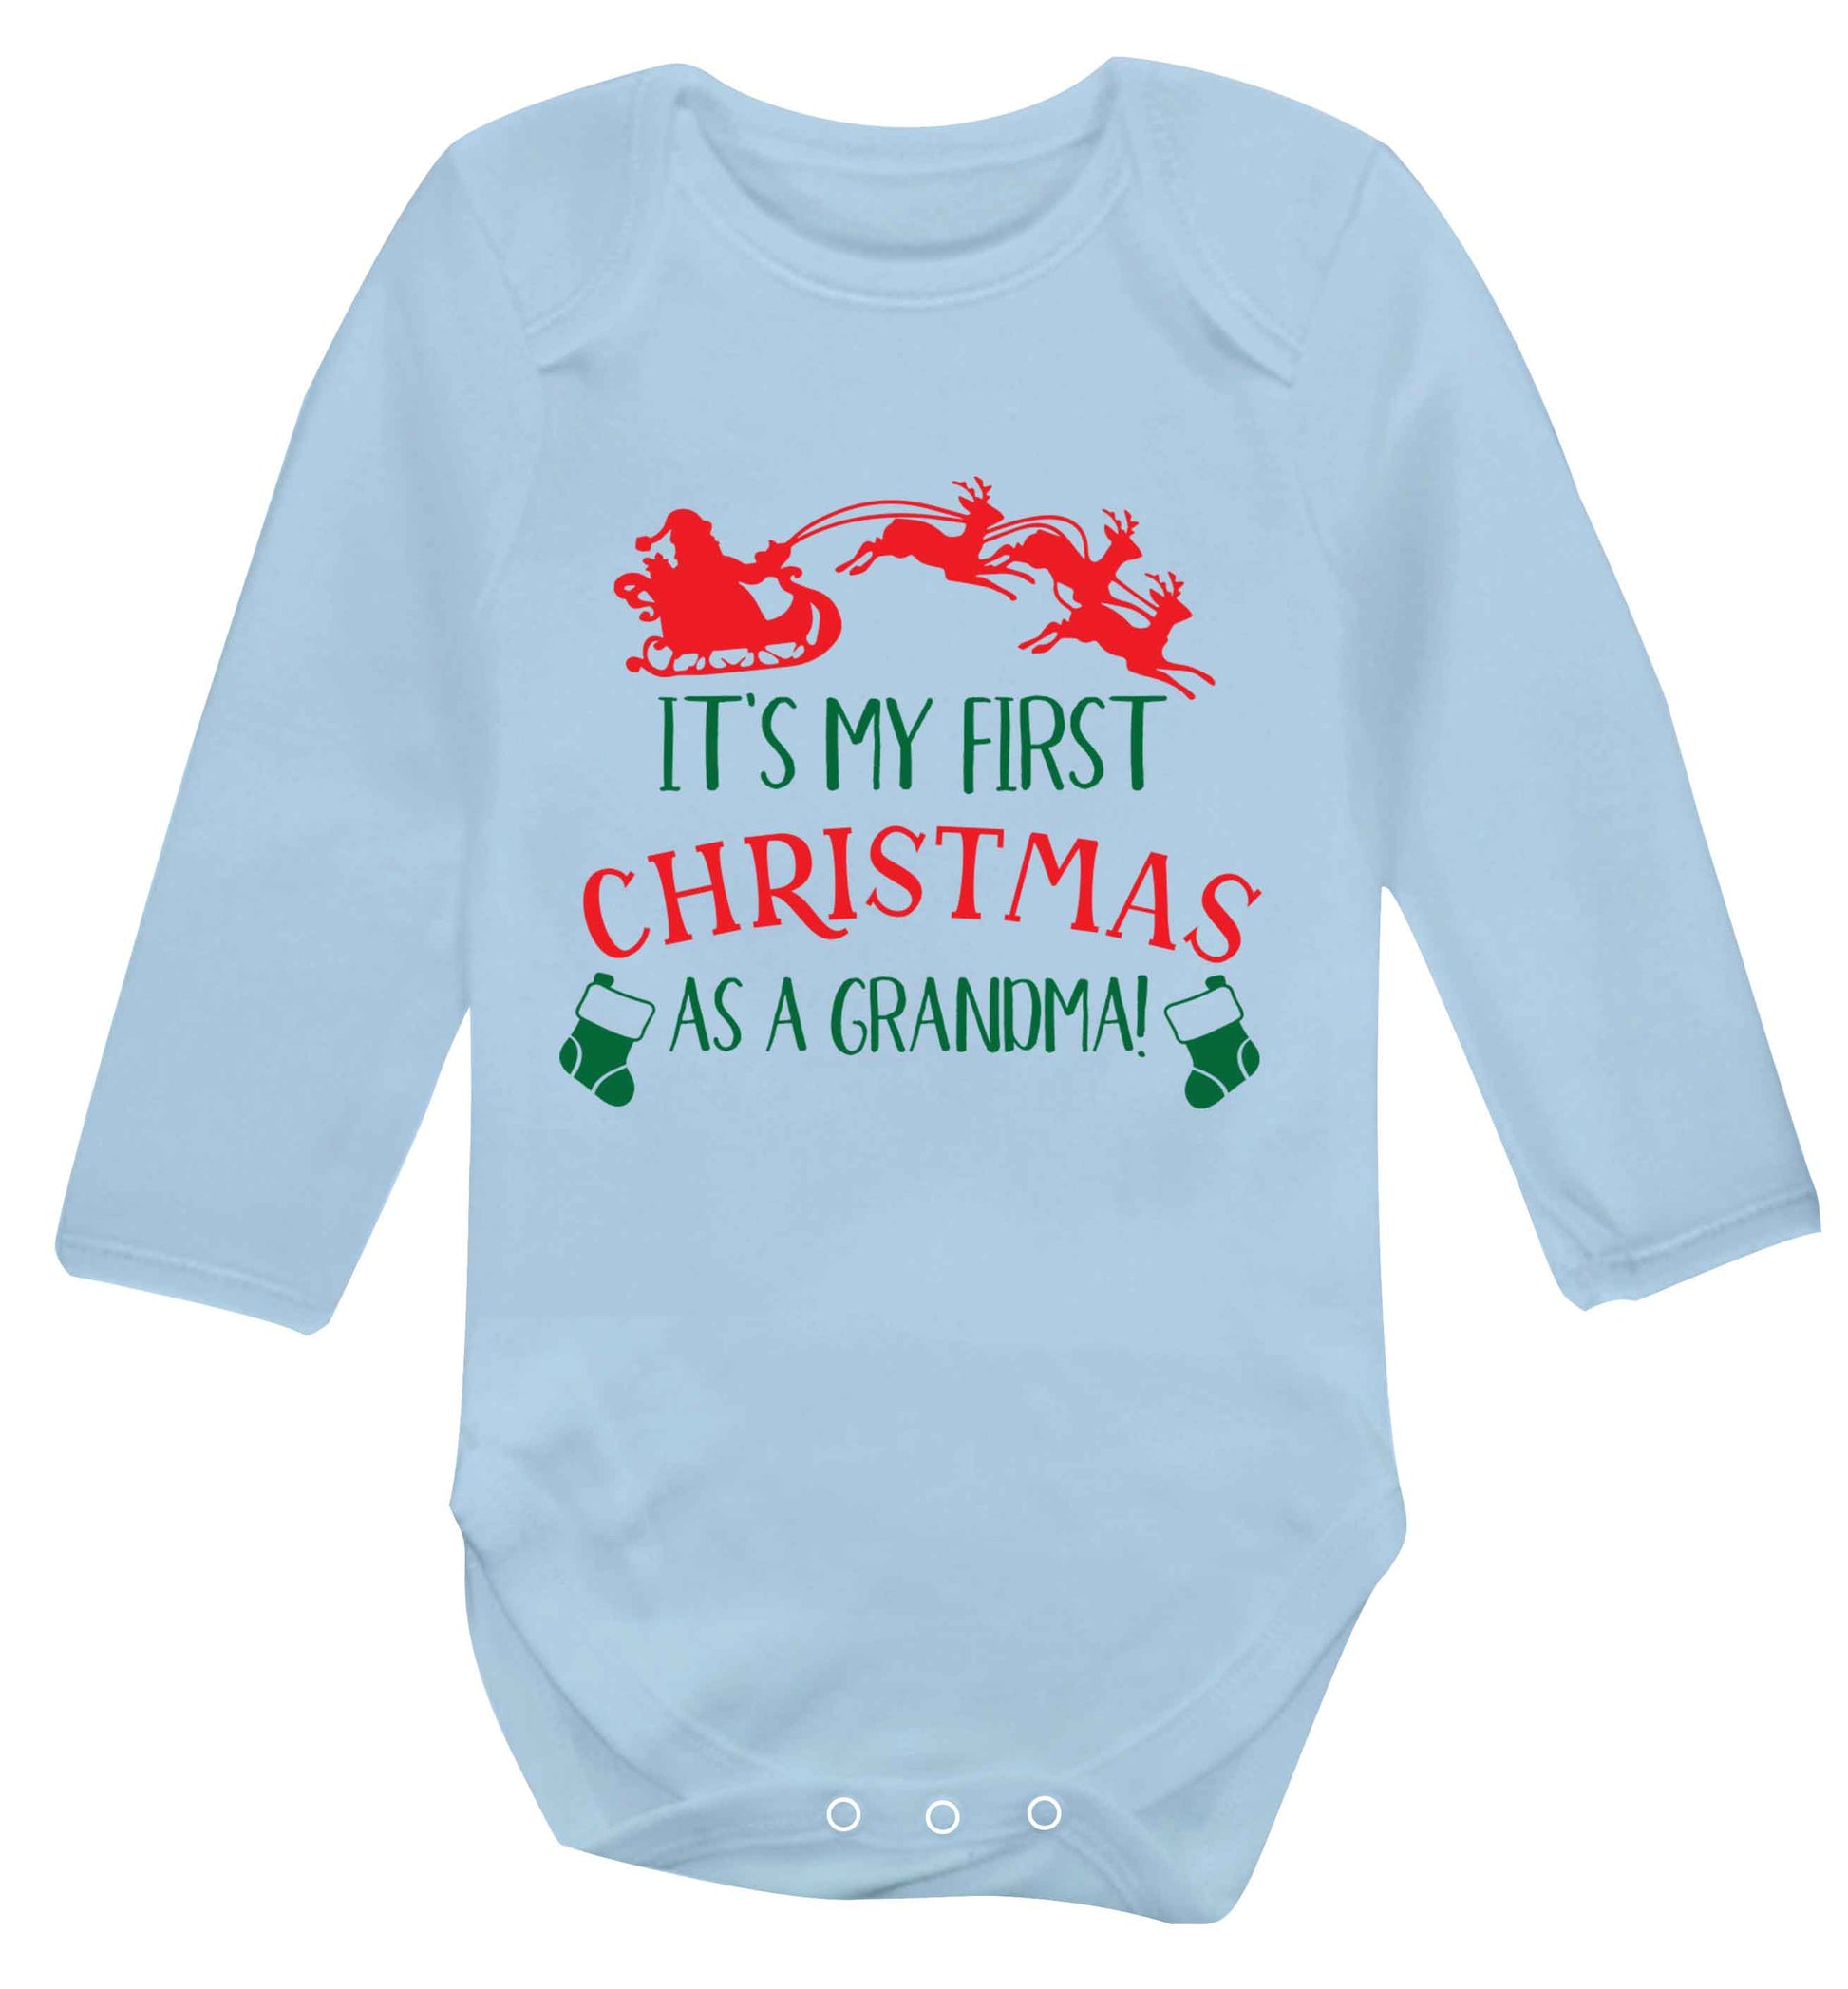 It's my first Christmas as a grandma! Baby Vest long sleeved pale blue 6-12 months